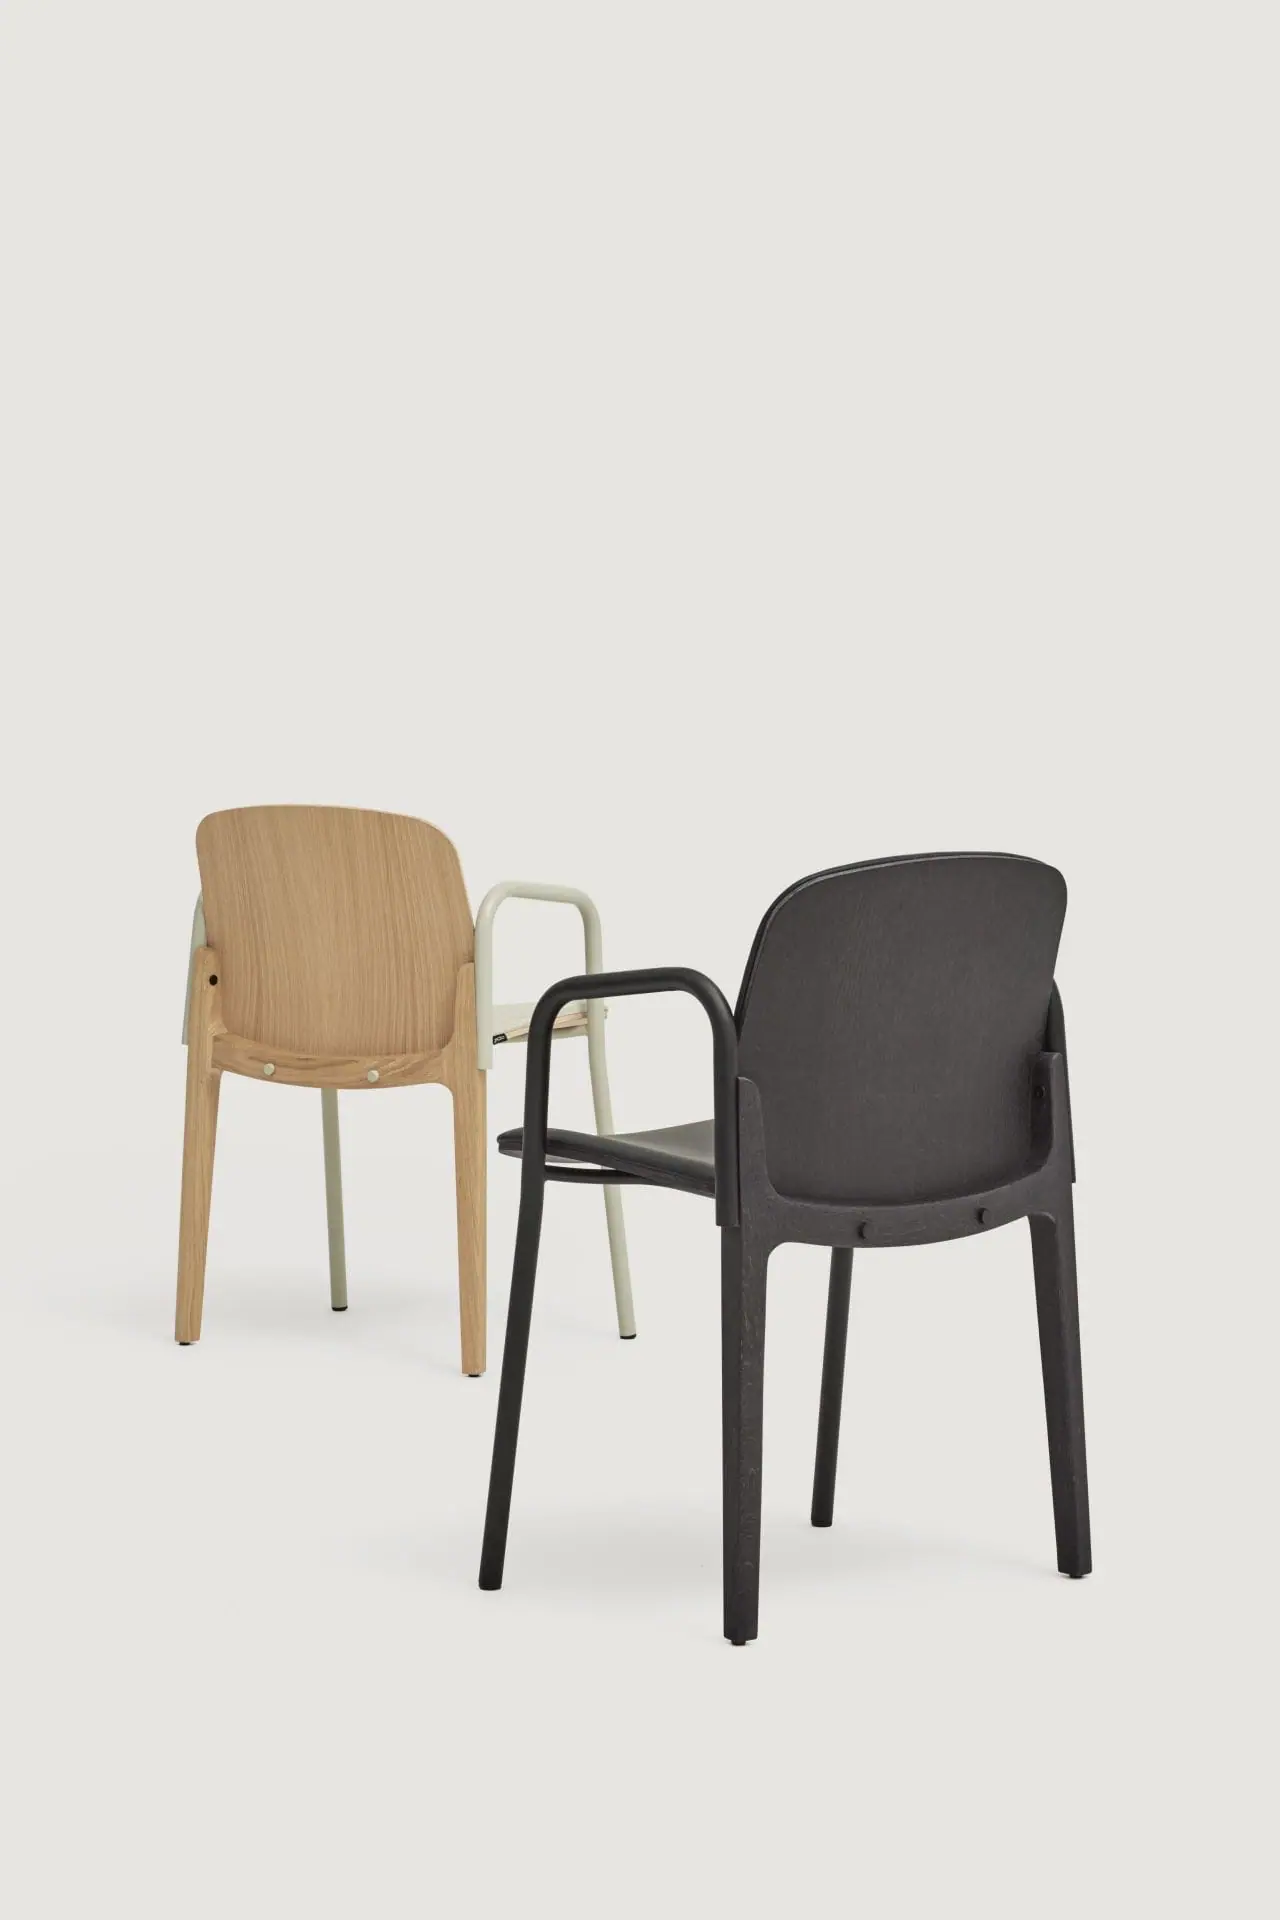 capdell-match-chair-03